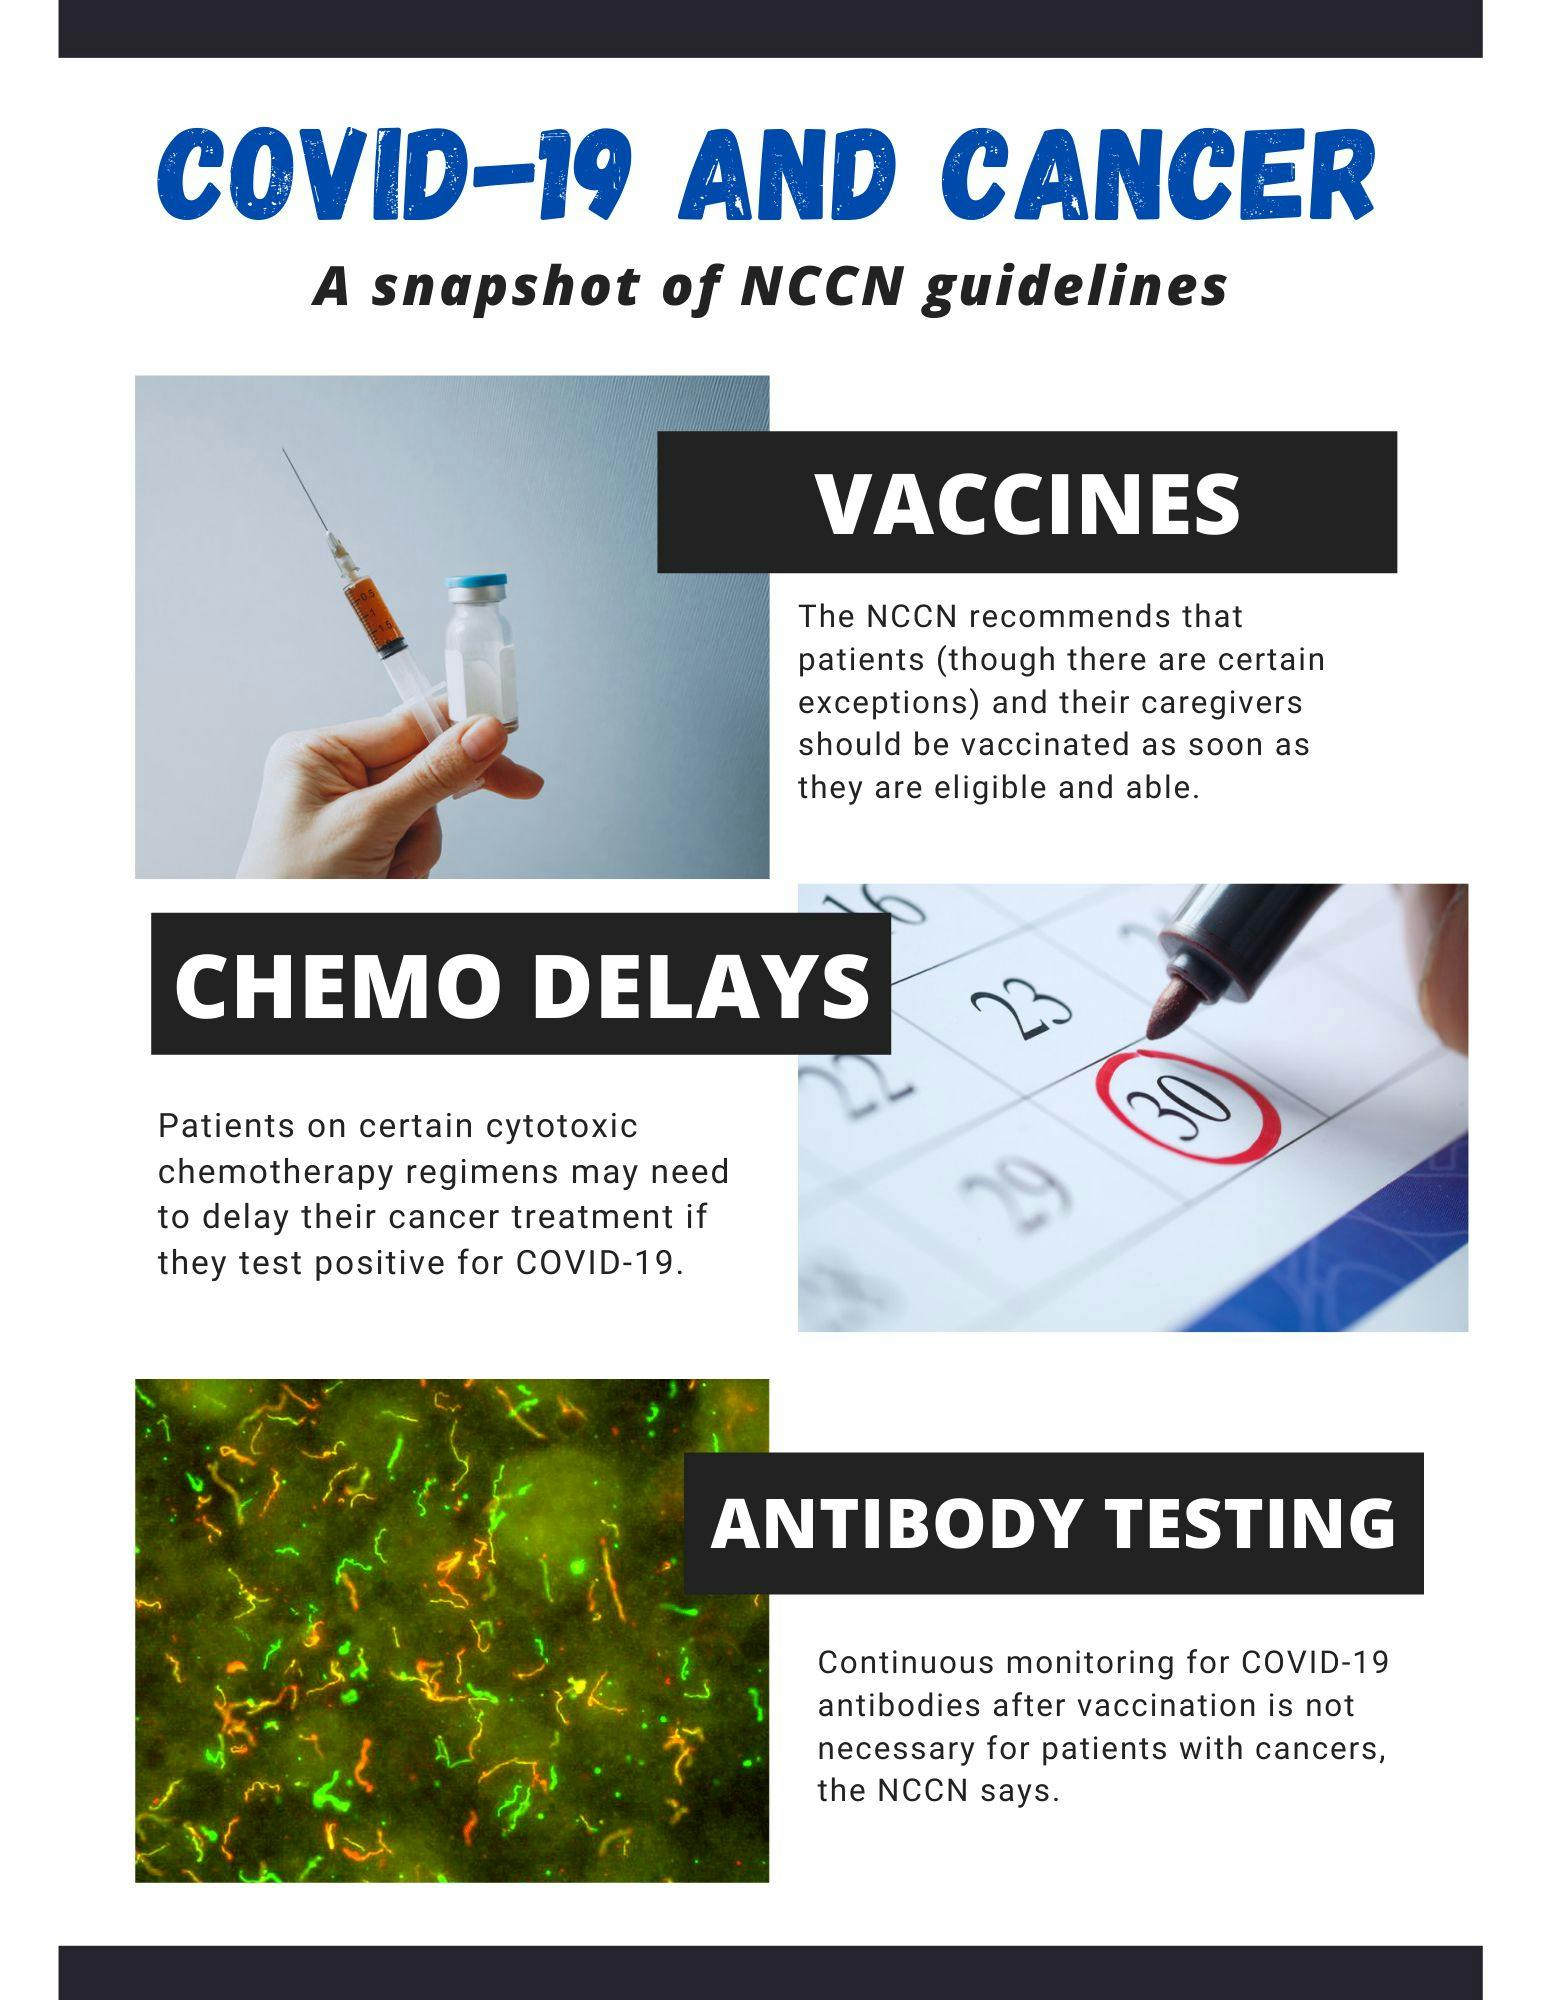 Quick Guide to the NCCN’s COVID-19 and Cancer Guidelines